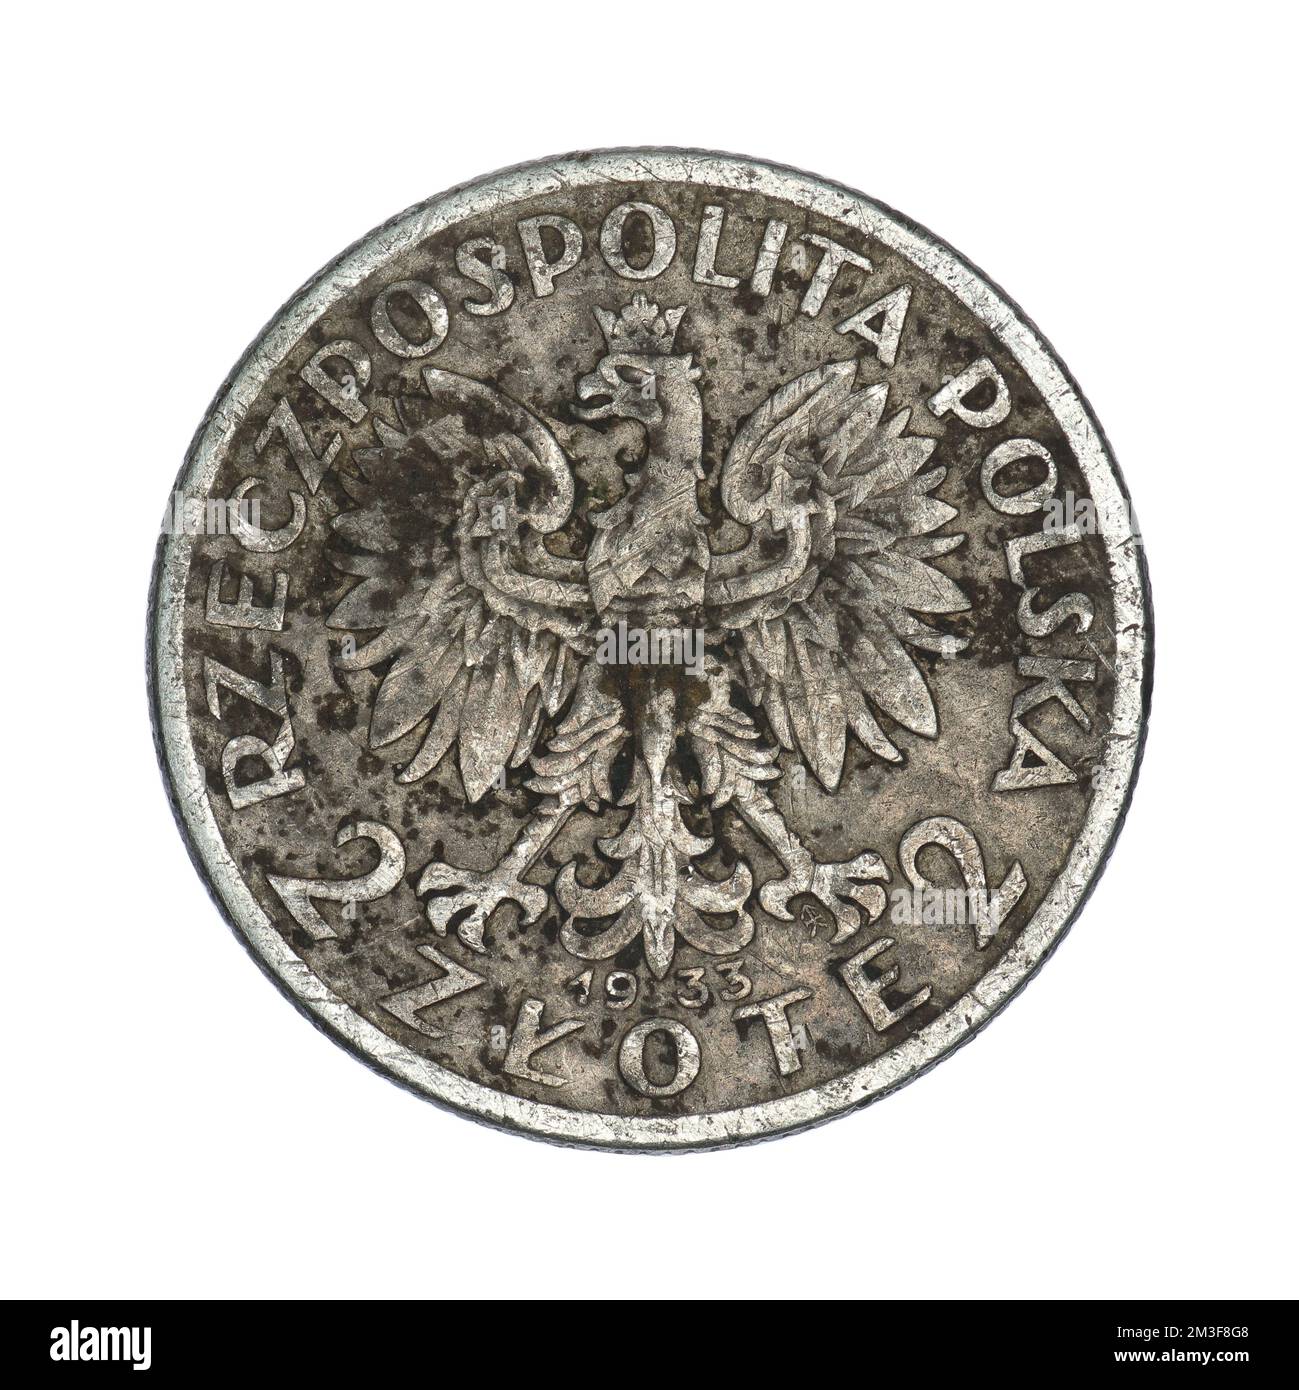 Poland 2 zlotys, 1932-1934 Queen Jadwiga on a white background Stock Photo